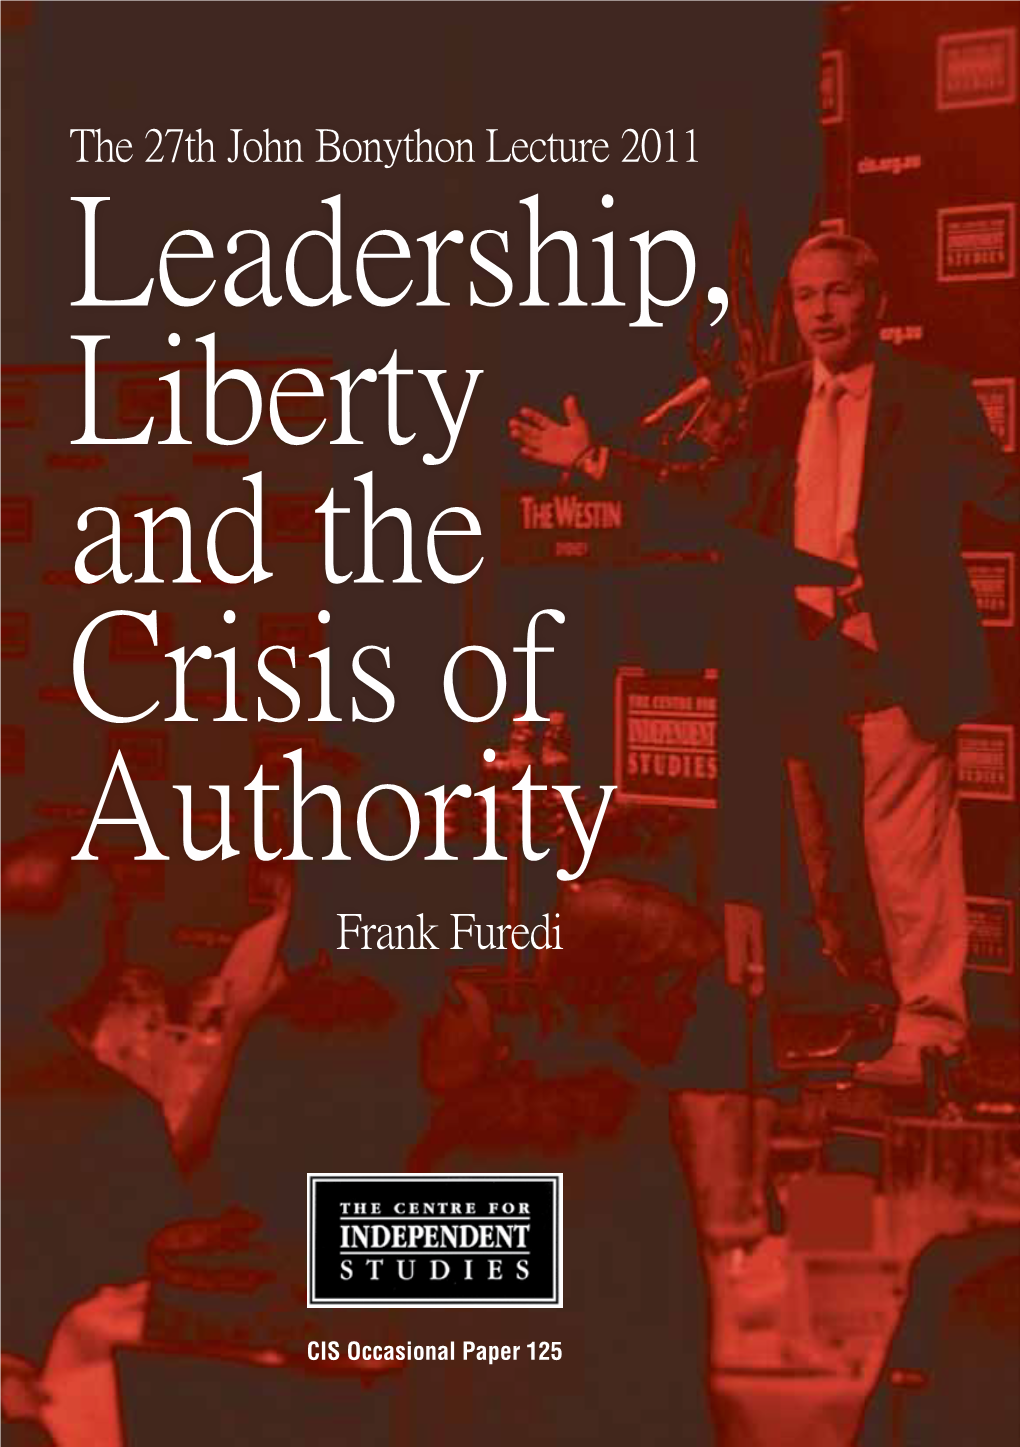 Leadership, Liberty and the Crisis of Authority